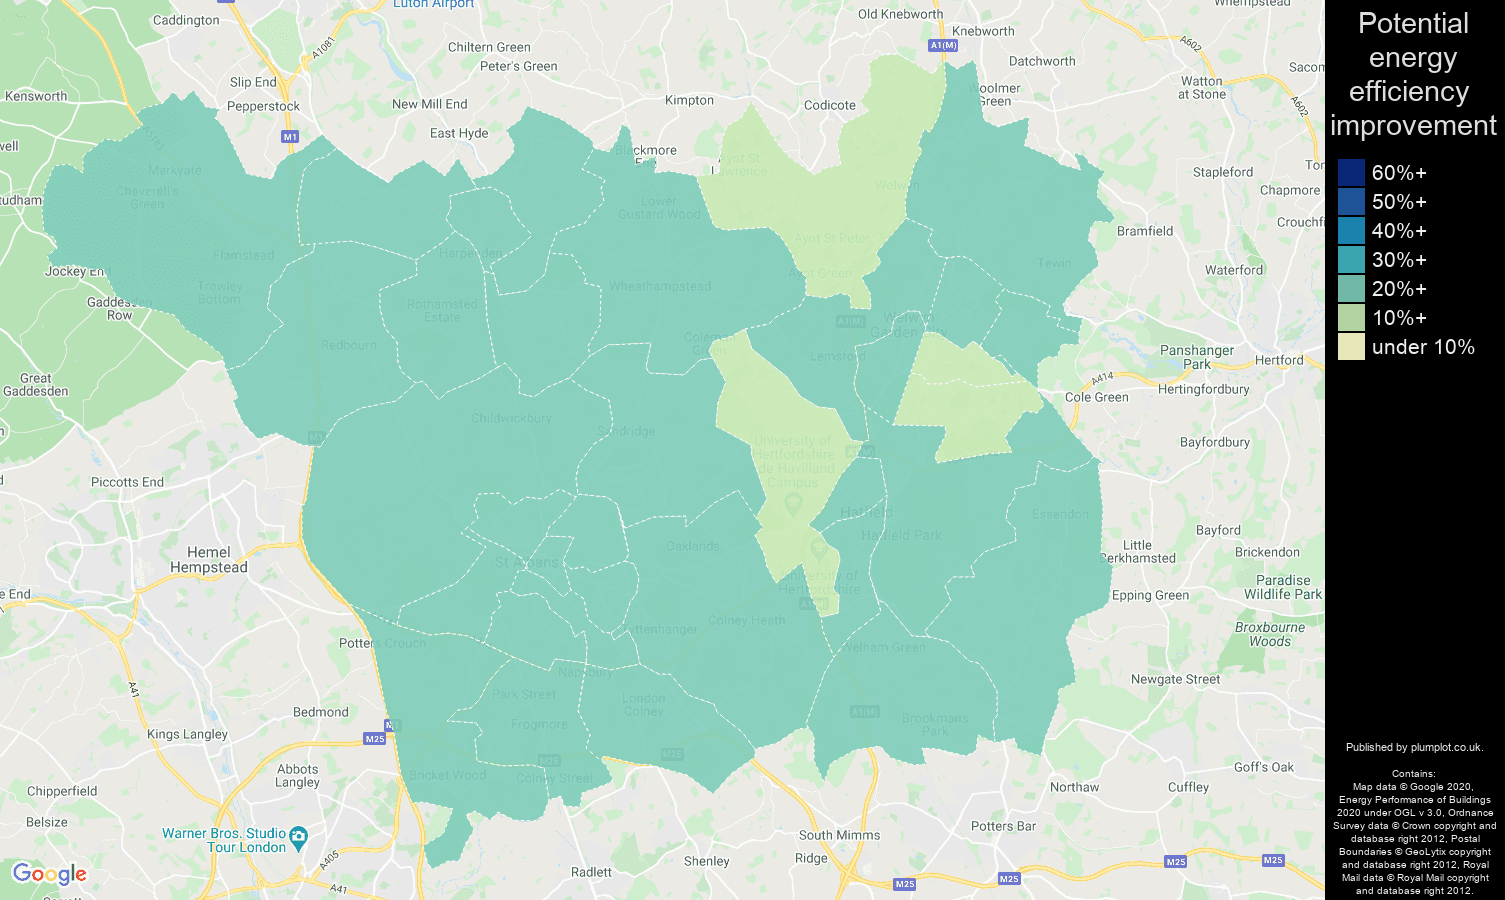 St Albans map of potential energy efficiency improvement of houses